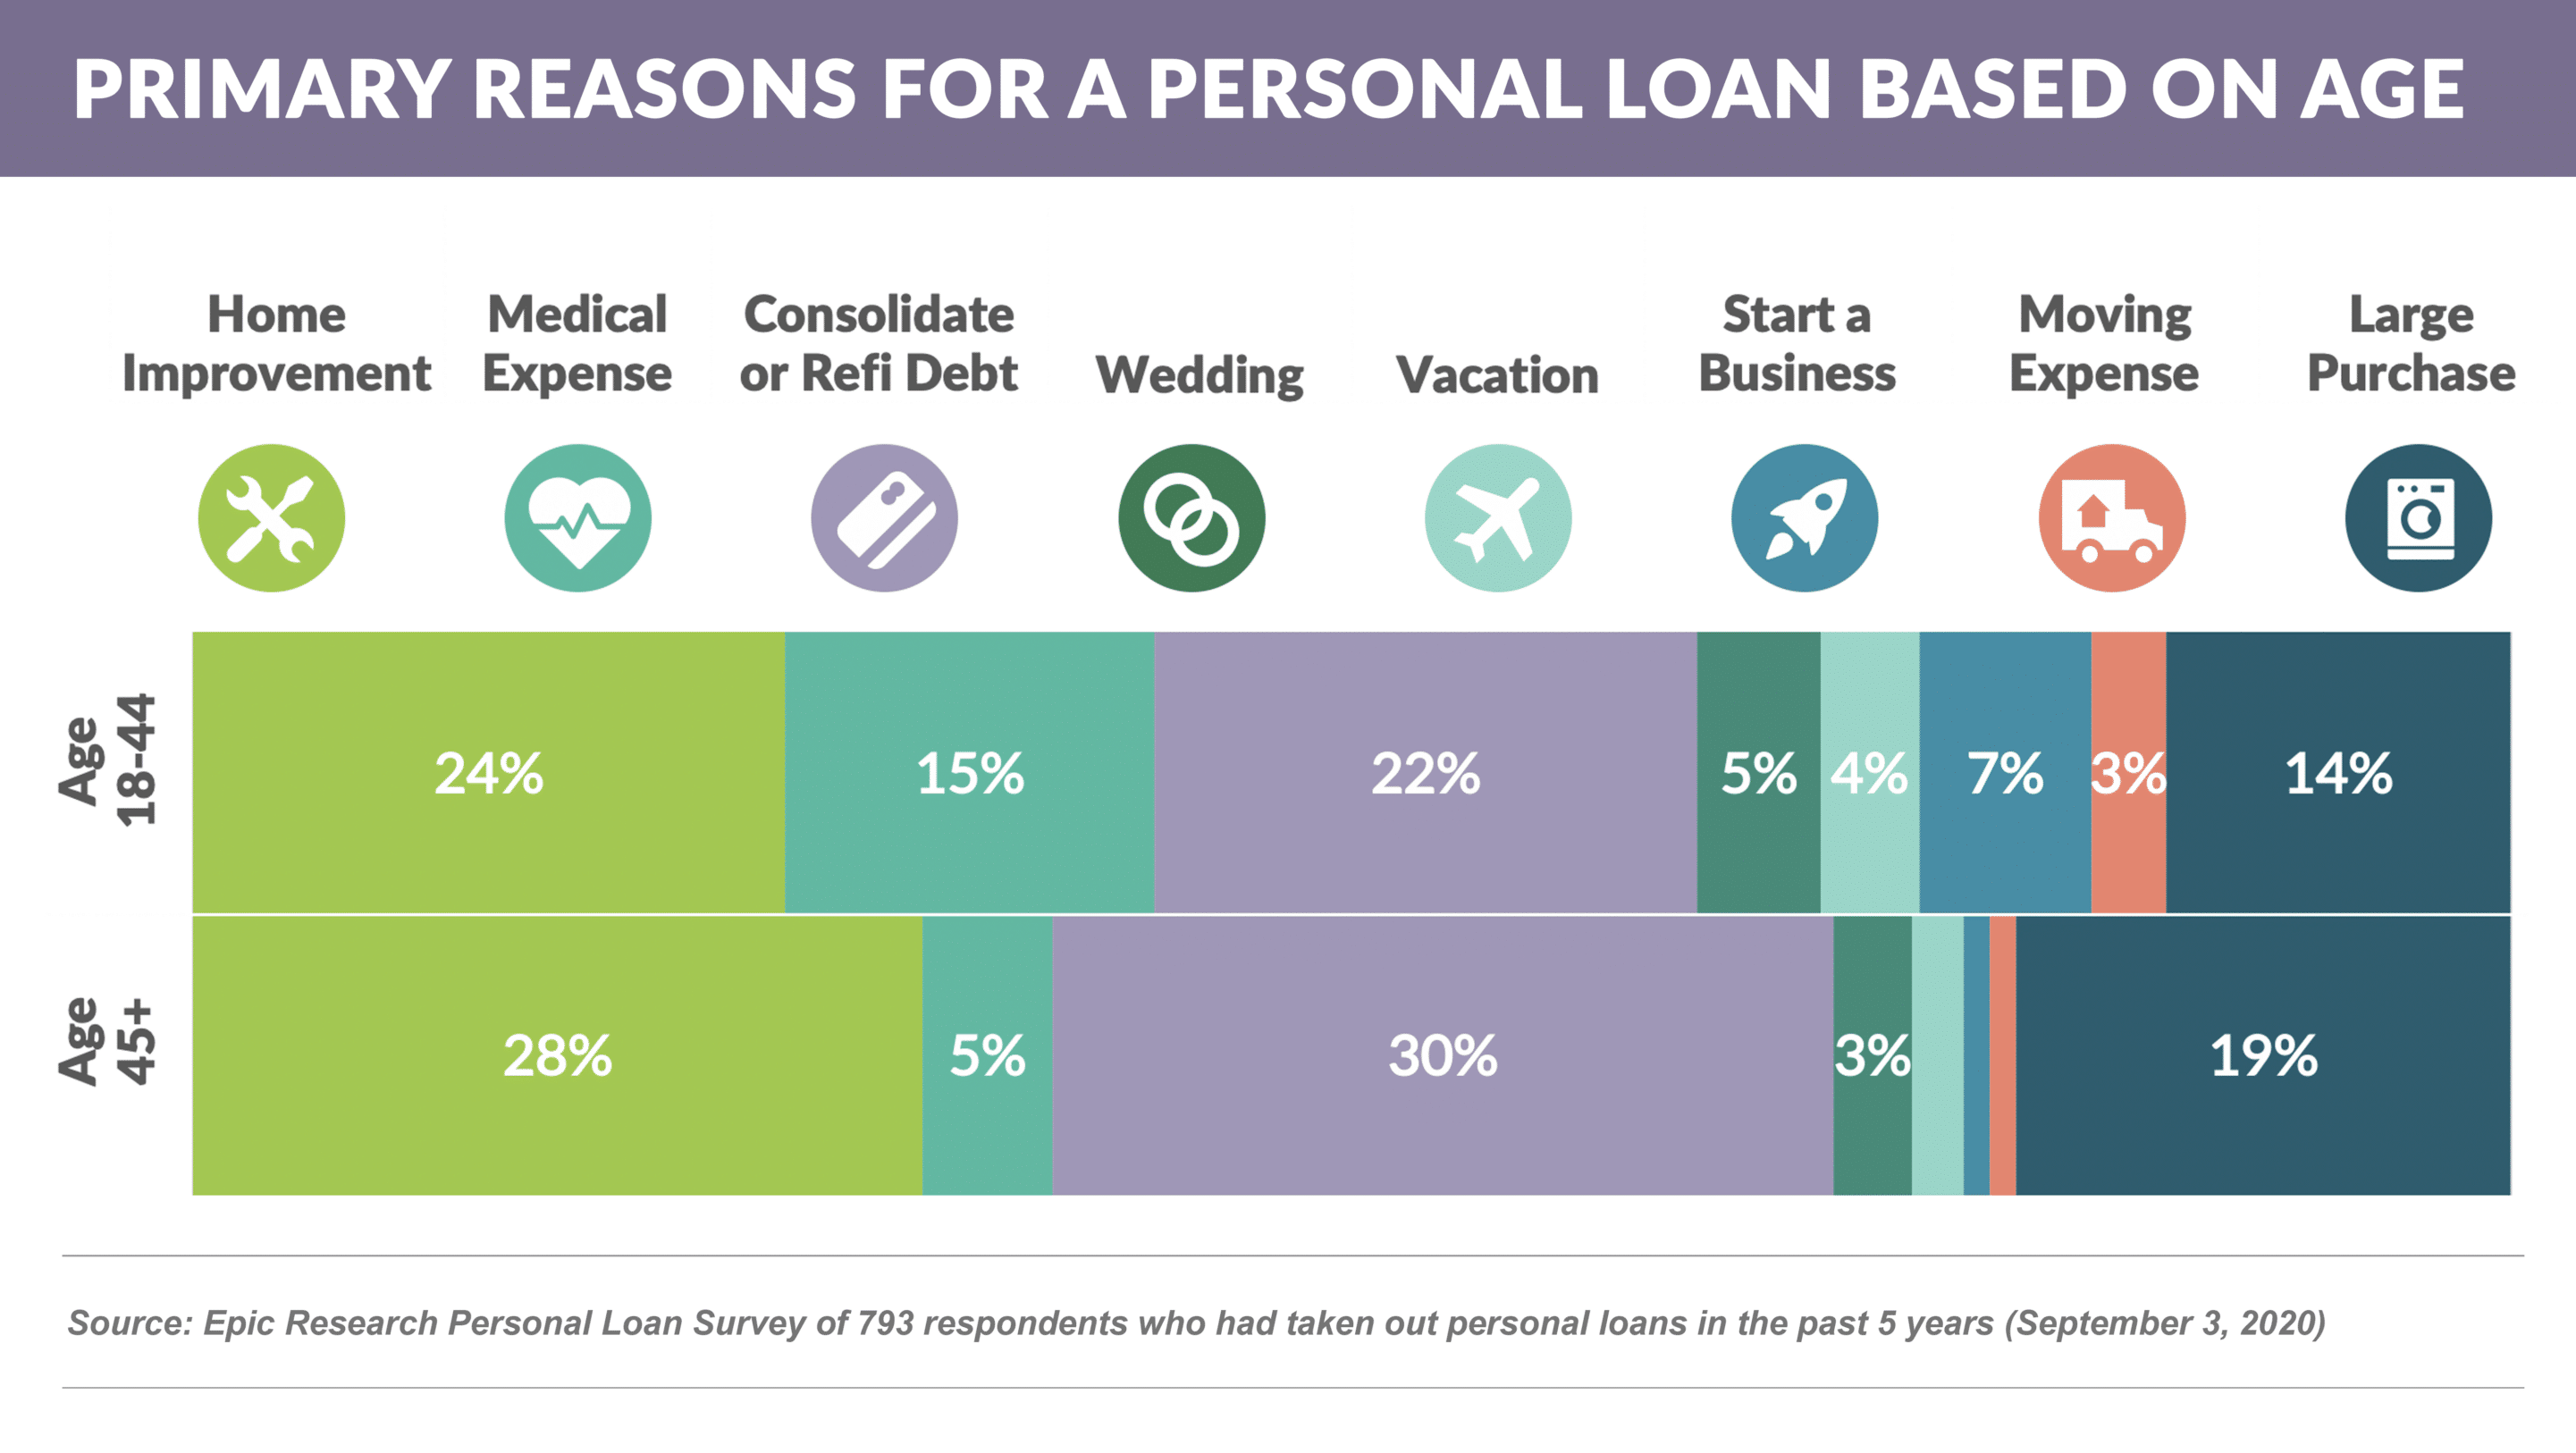 Primary Reasons for a Personal Loan Based on Age